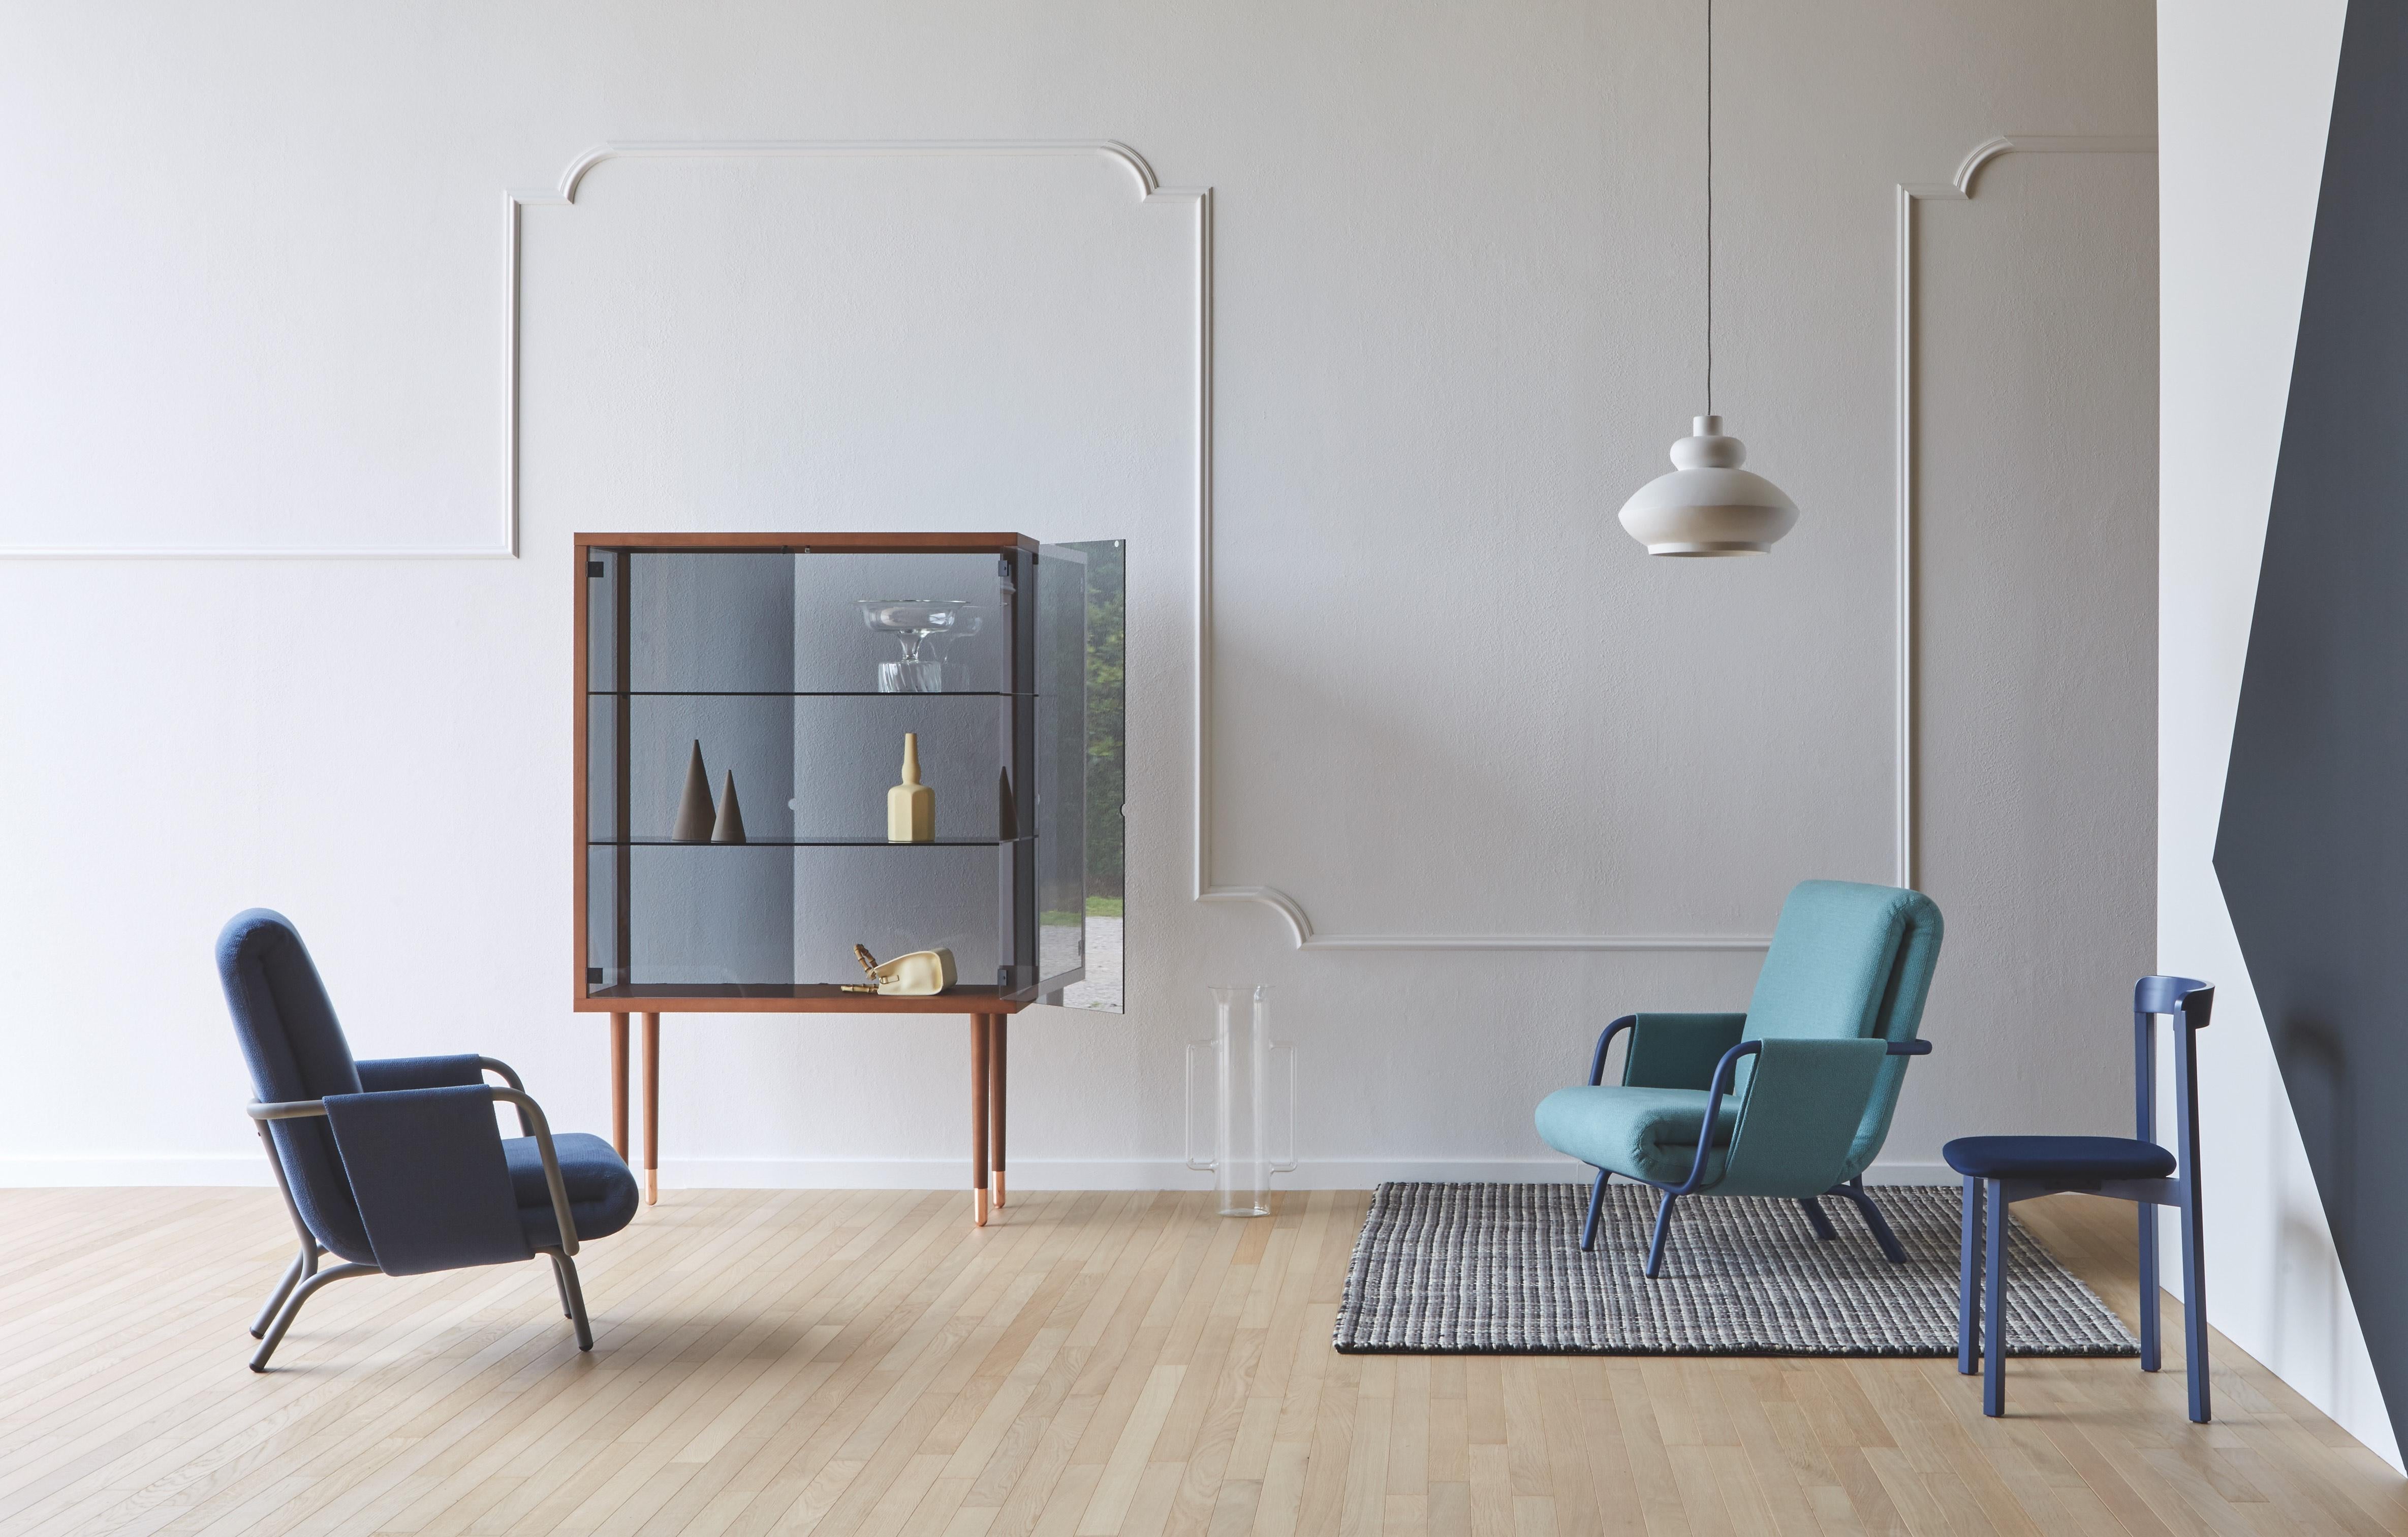 Juno is a container of stories. It is the attempt to reawaken the romantic side of the house, lost in the contemporary frenzy. It is the will to revive the concept of the glass cabinet, with tall legs, squared shapes, and neutral colours. It is the